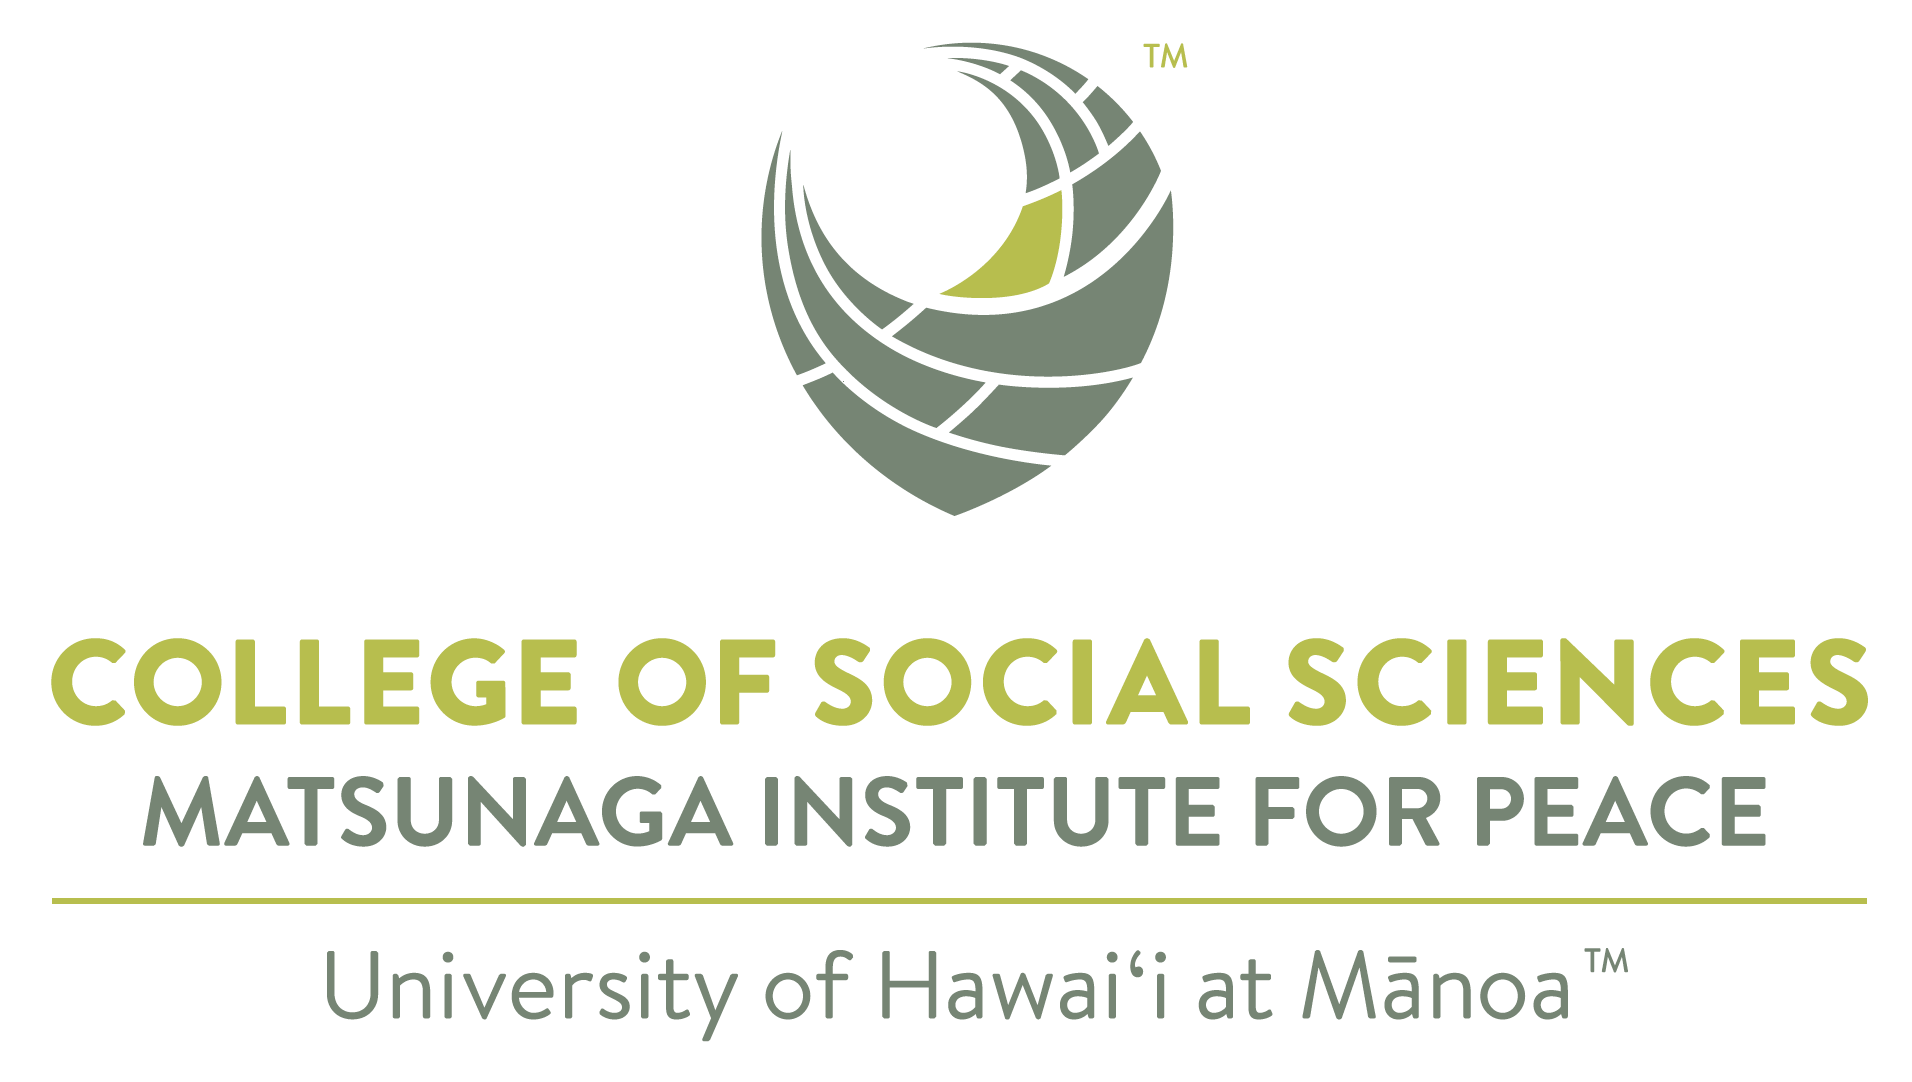 Matsunaga Institute for Peace and Conflict Resolution at the University of Hawai’i at Mānoa